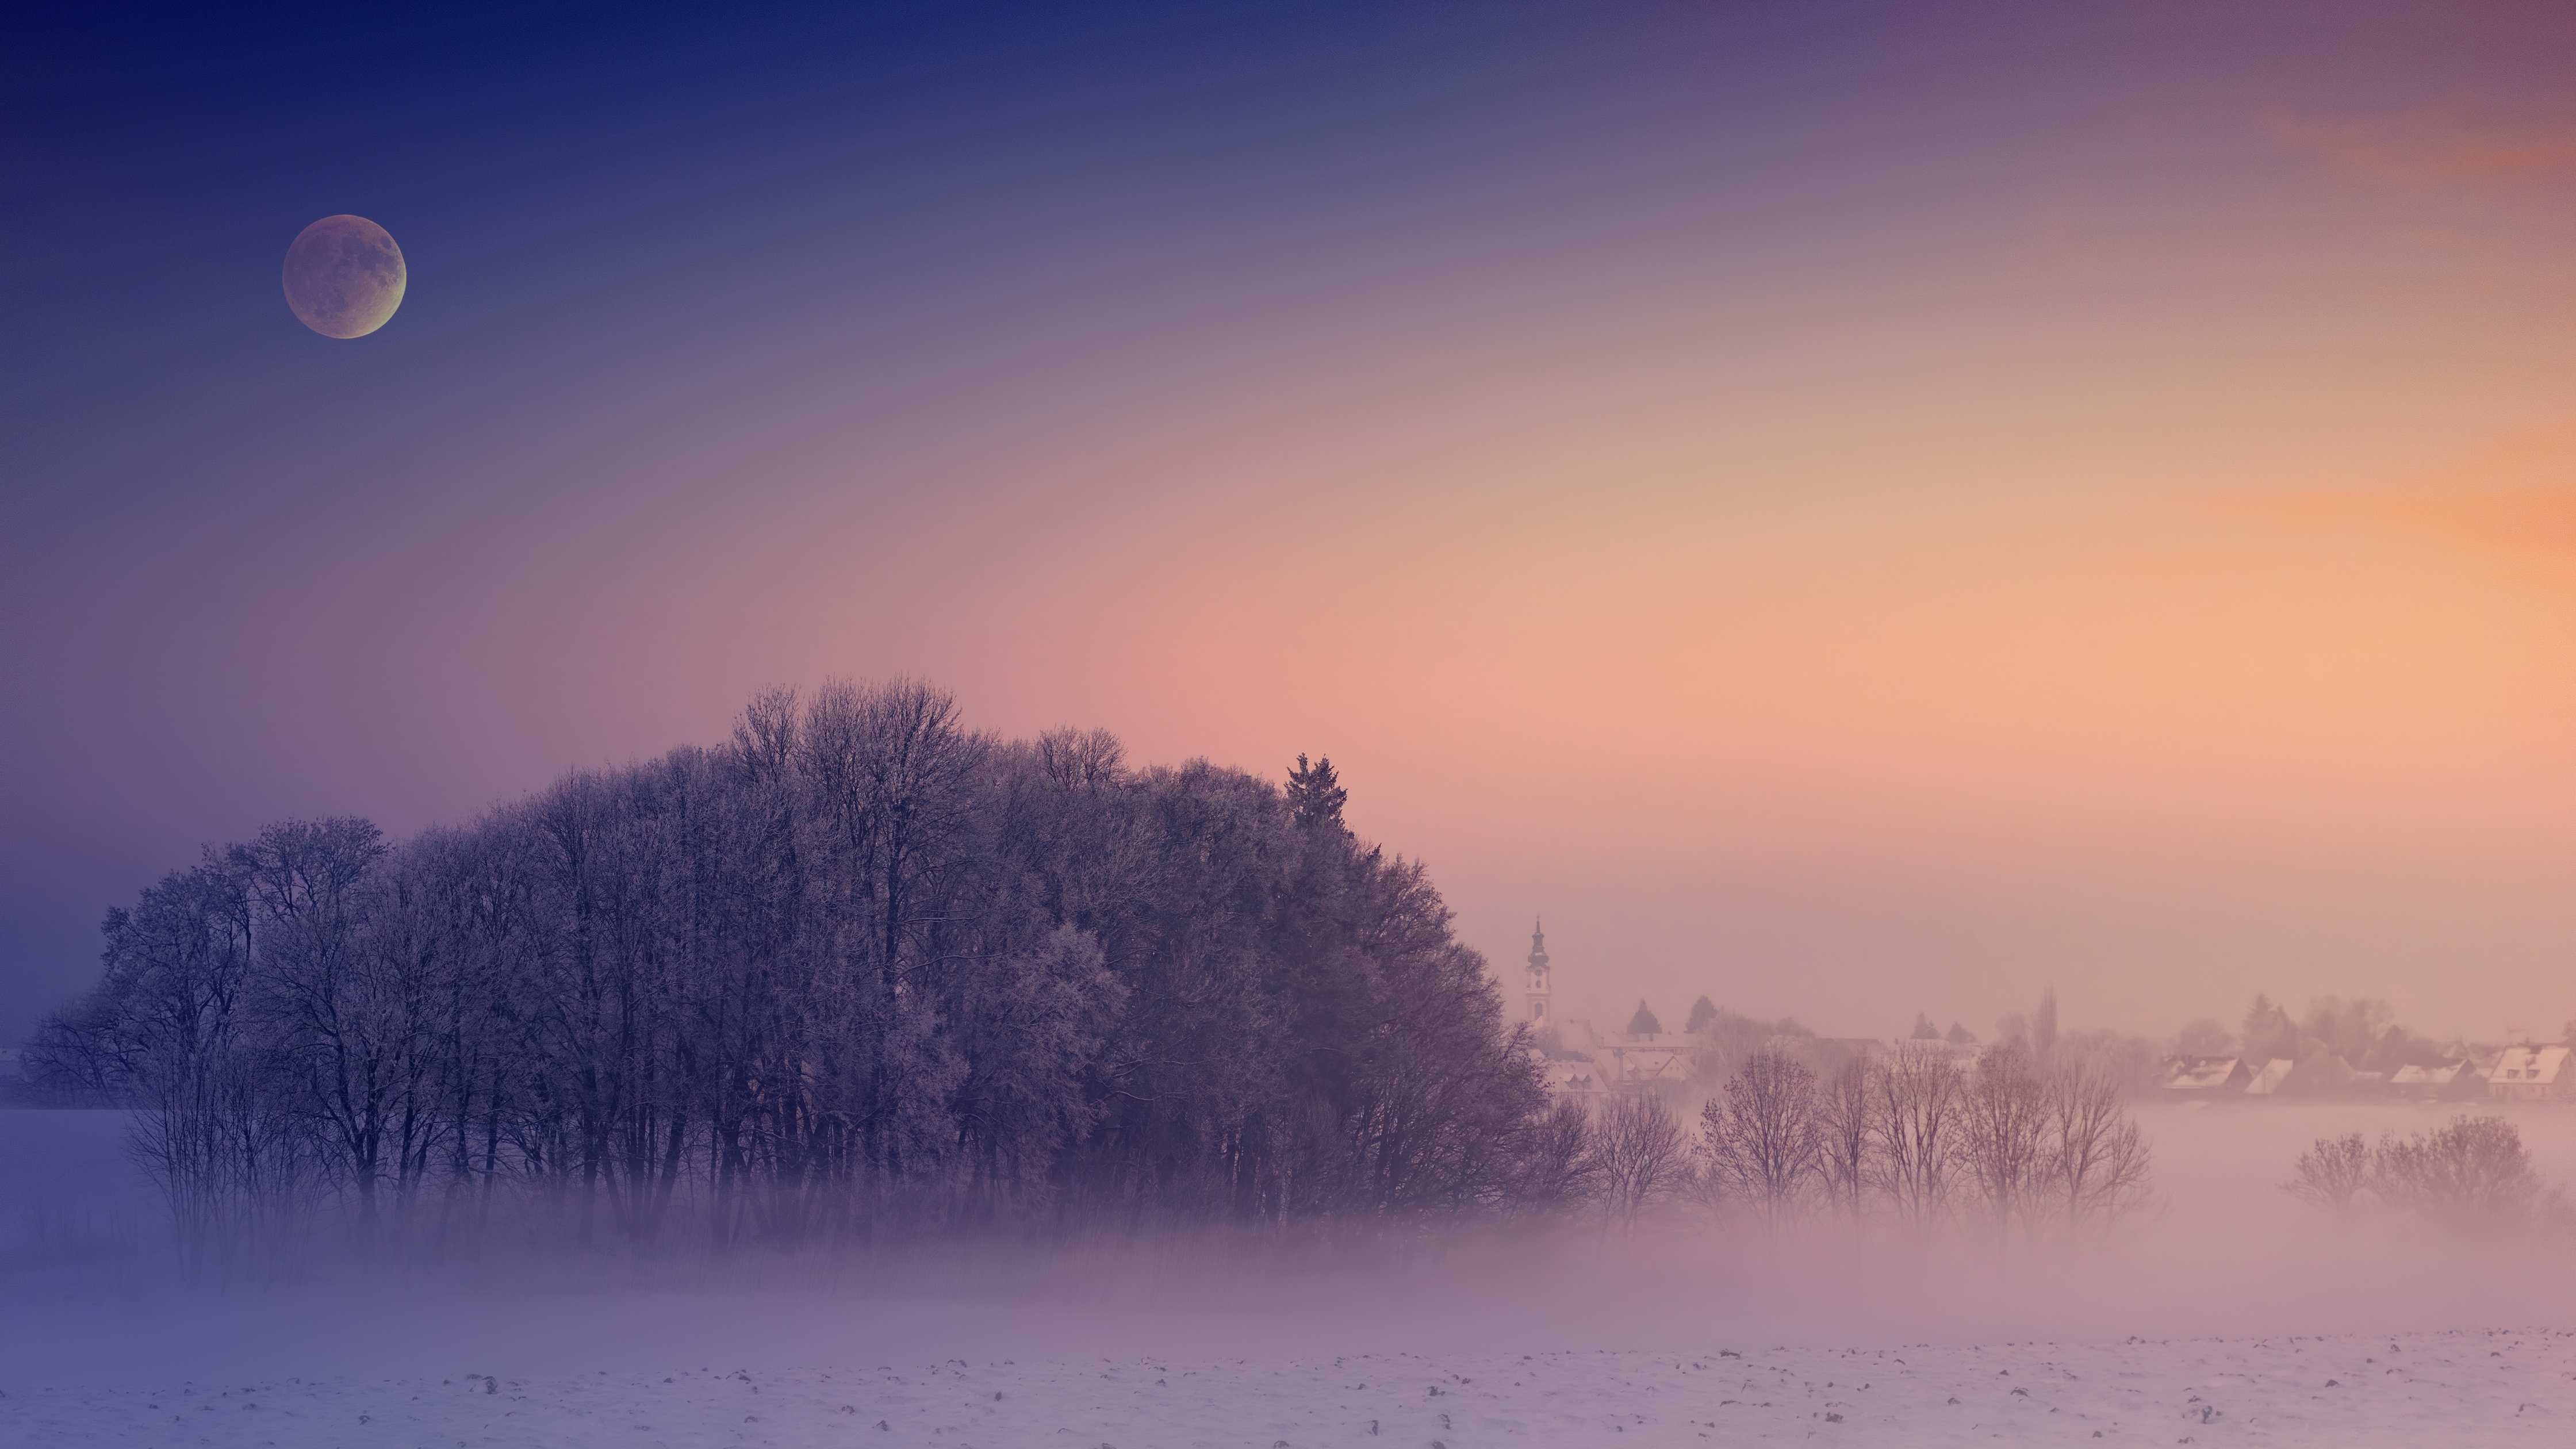 41 Winter Aesthetic Wallpapers for a Frosty Magical Phone Screen  The  Mood Guide